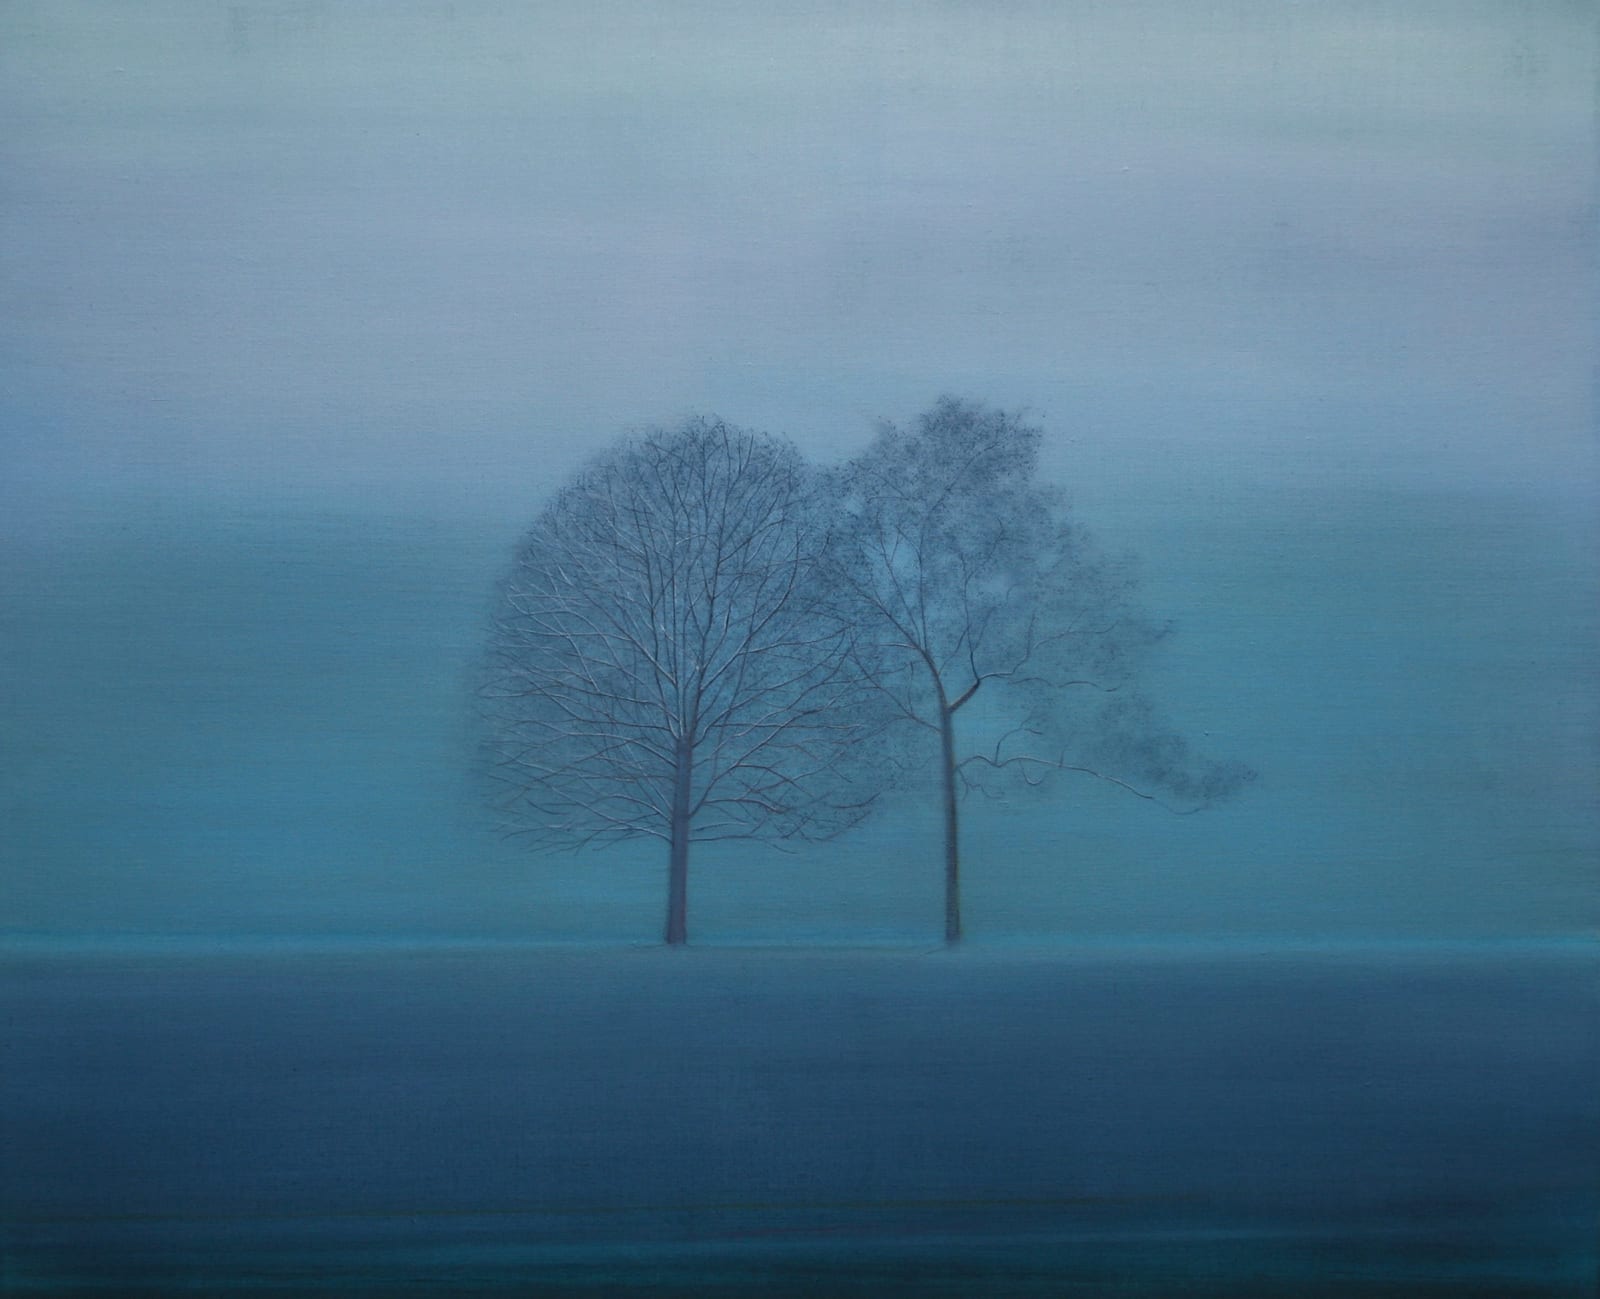 THOMAS LAMB, Two Trees in Mist at Dusk, 2011